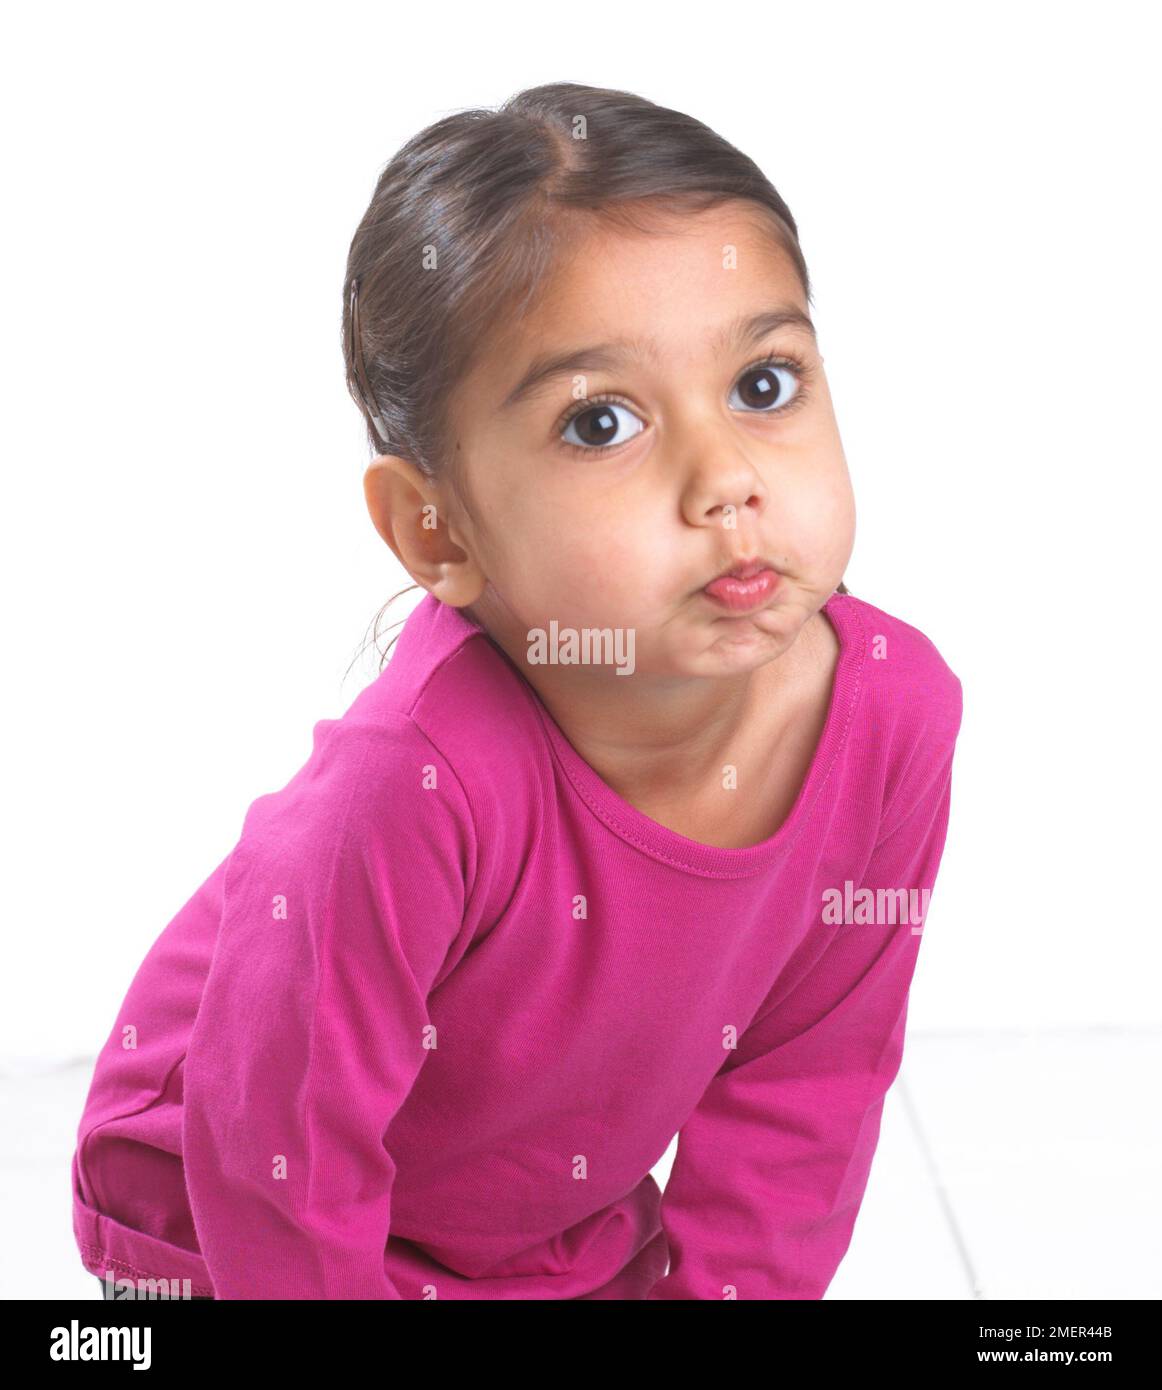 Girl wearing pink top bending forward blowing a raspberry, 3.5 years Stock Photo